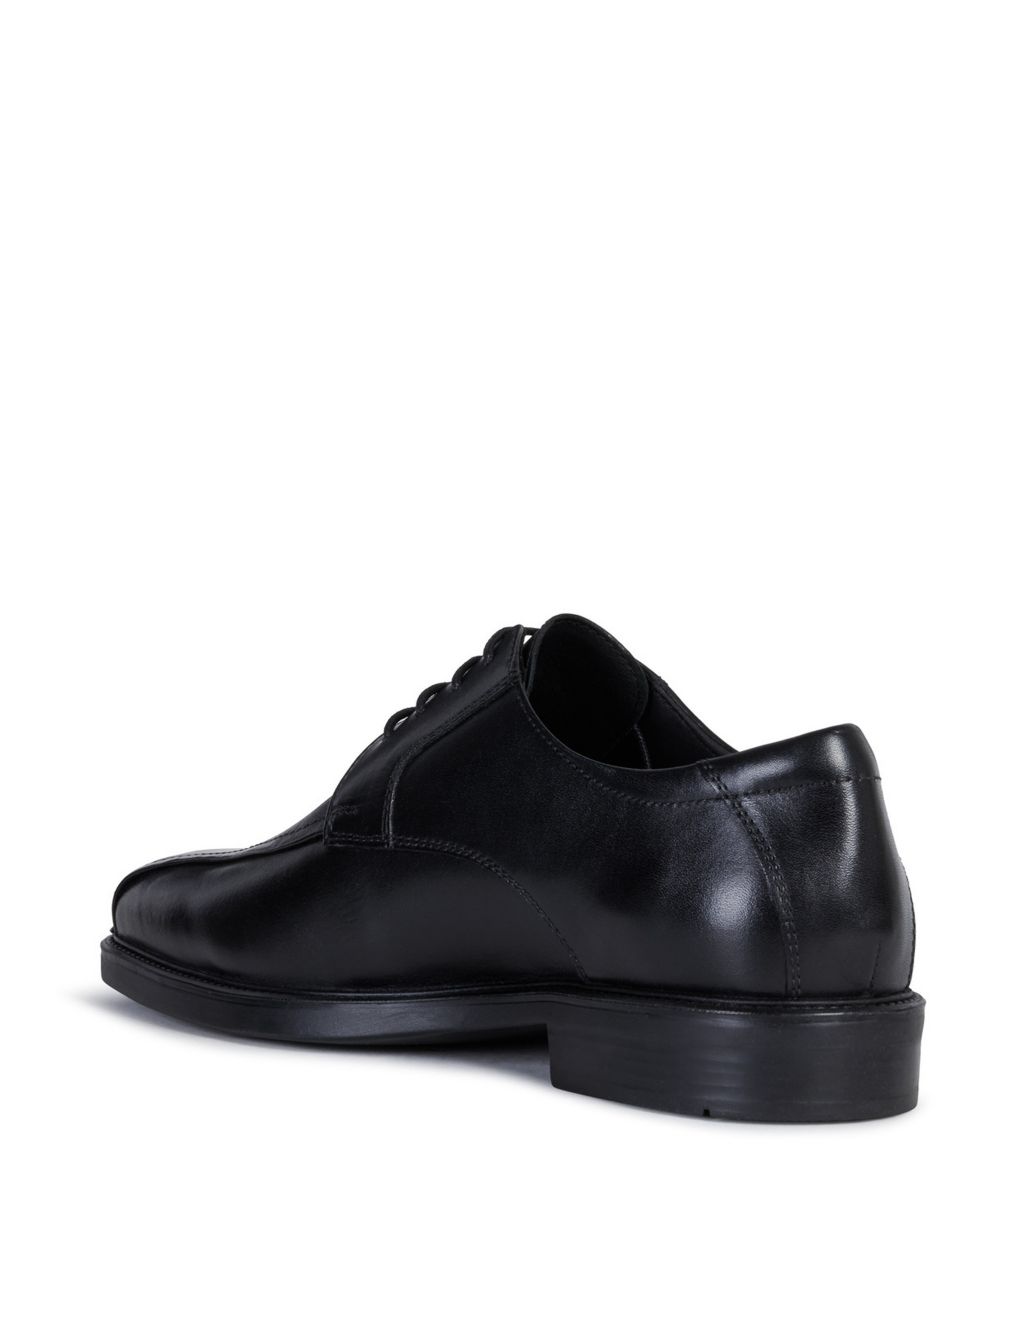 Wide Fit Leather Oxford Shoes | Geox | M&S